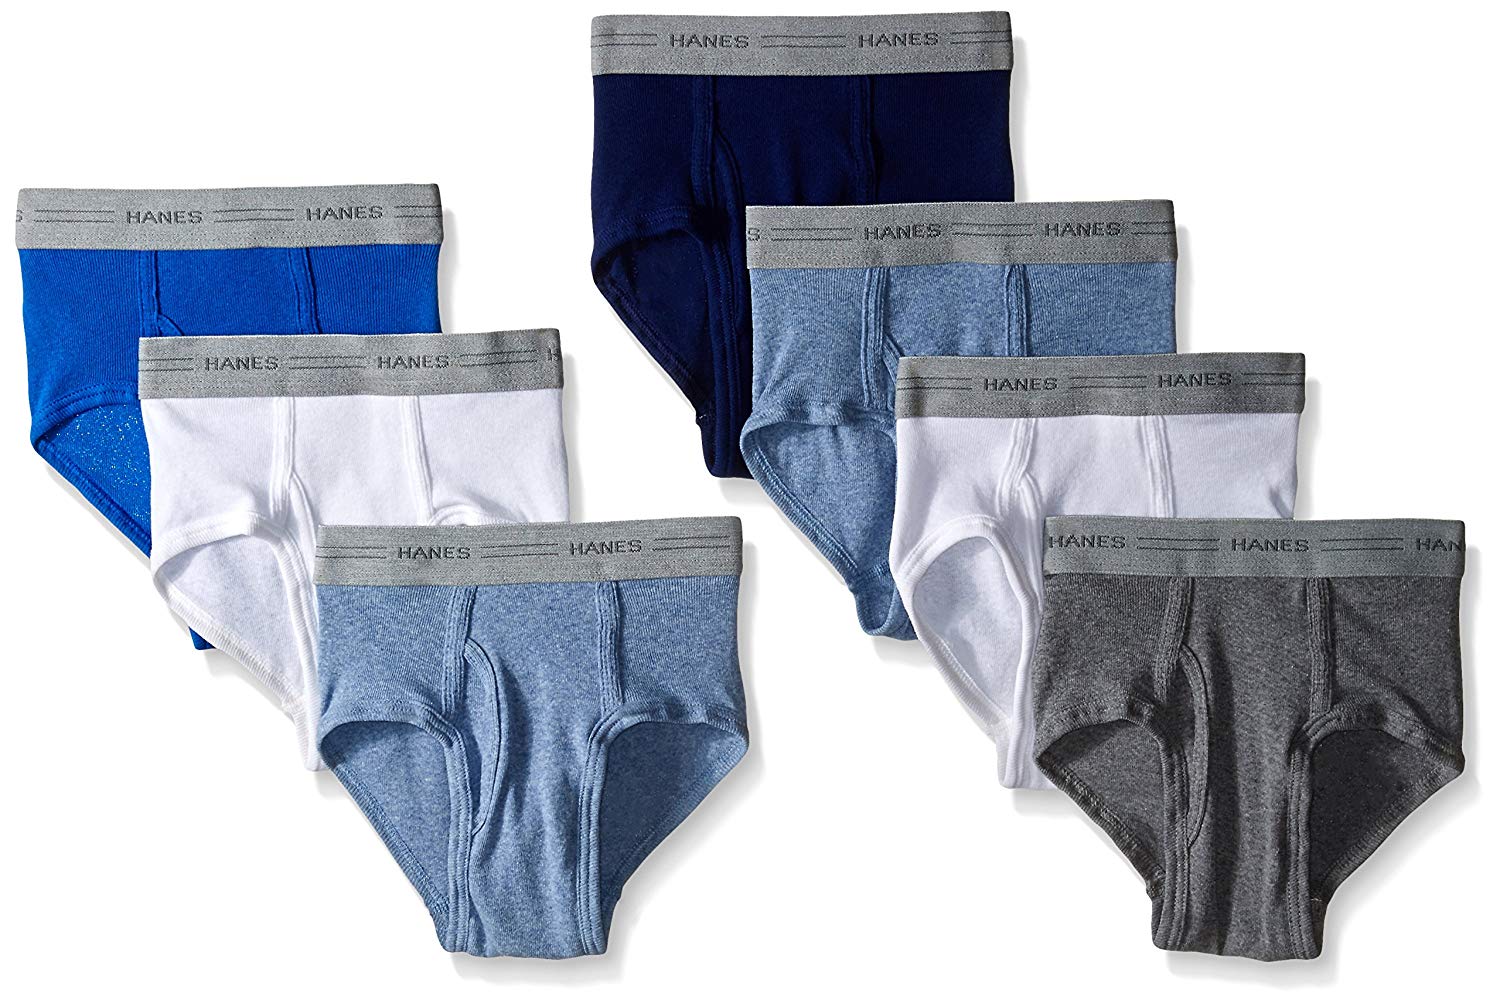 Hanes Boys' 7-Pack Dyed Briefs, Assorted, Large, Assorted, Size Medium ...